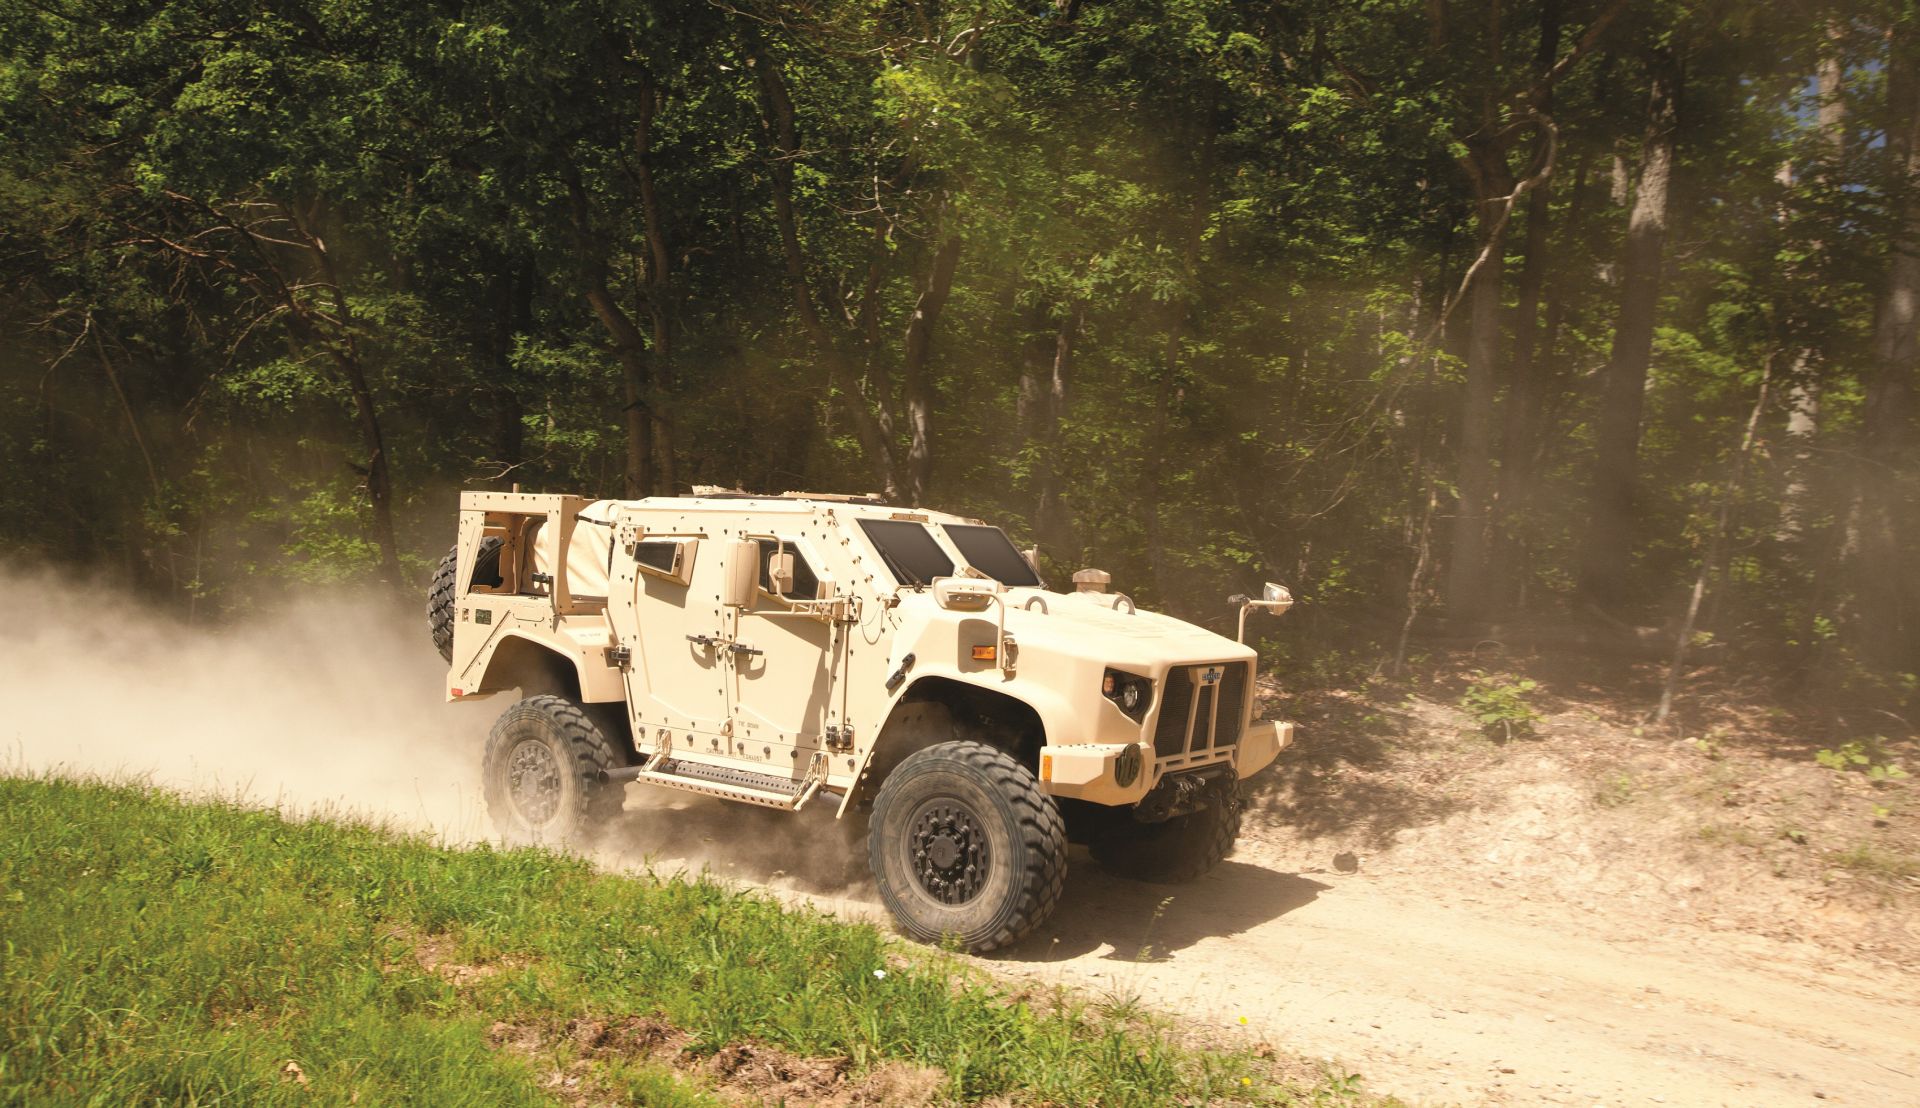 Joint Light Tactical Vehicle #23